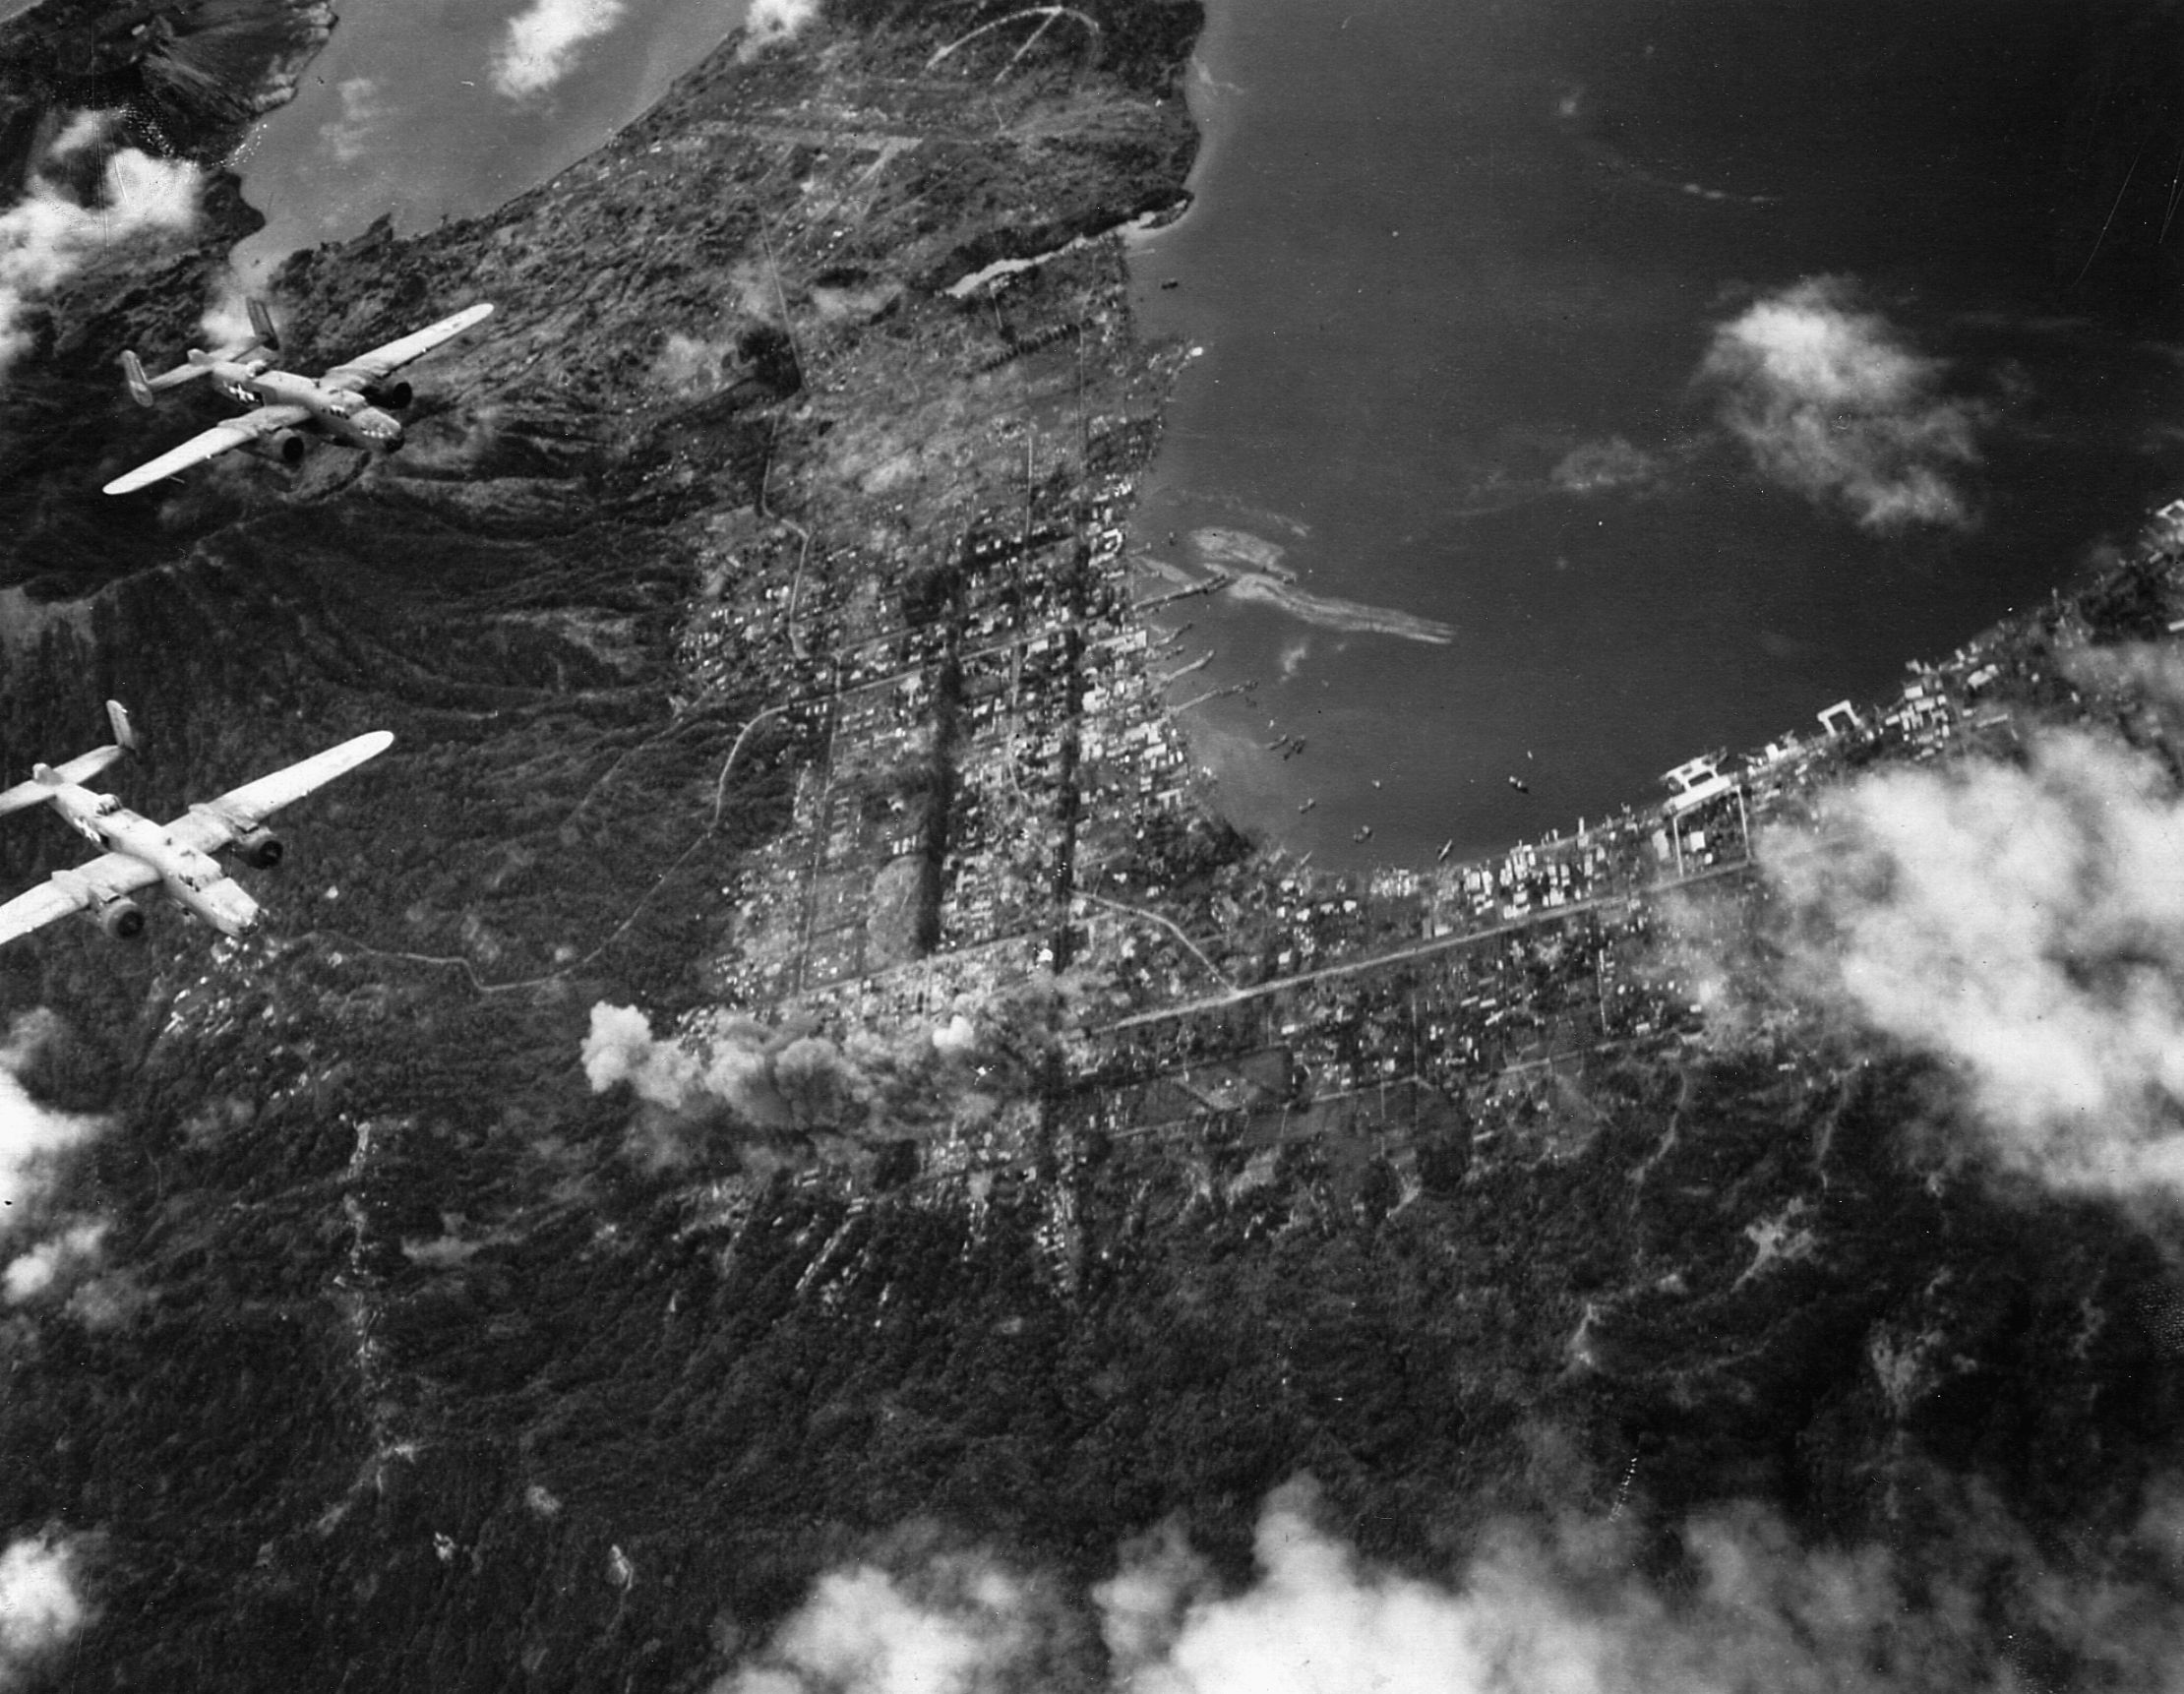 B-25 bombers in formation over the Japanese bastion at Rabaul in March 1944. Allied control of the skies was crucial during the three-year-long campaign.